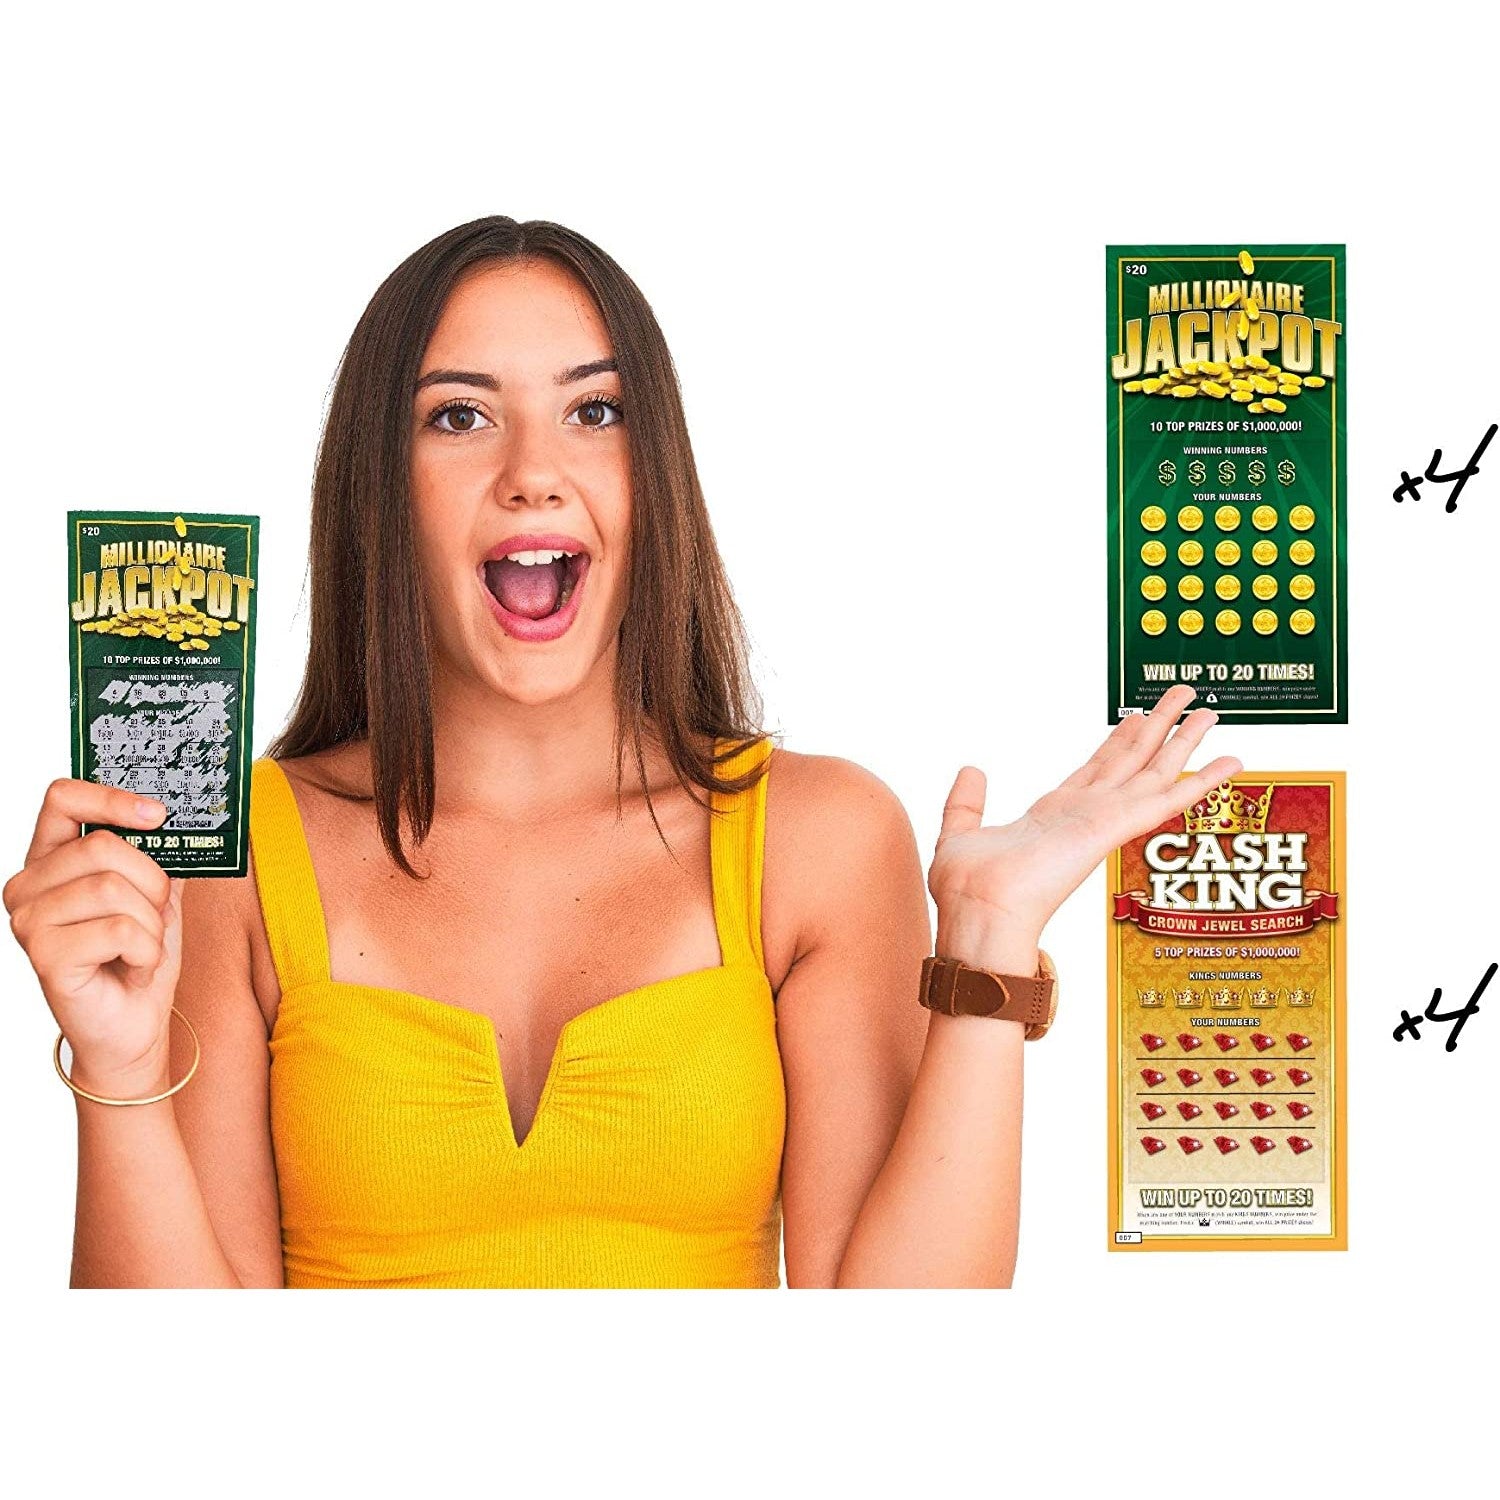 A woman is holding a fake winning lottery ticket. There are also examples of the fake lottery tickets available.